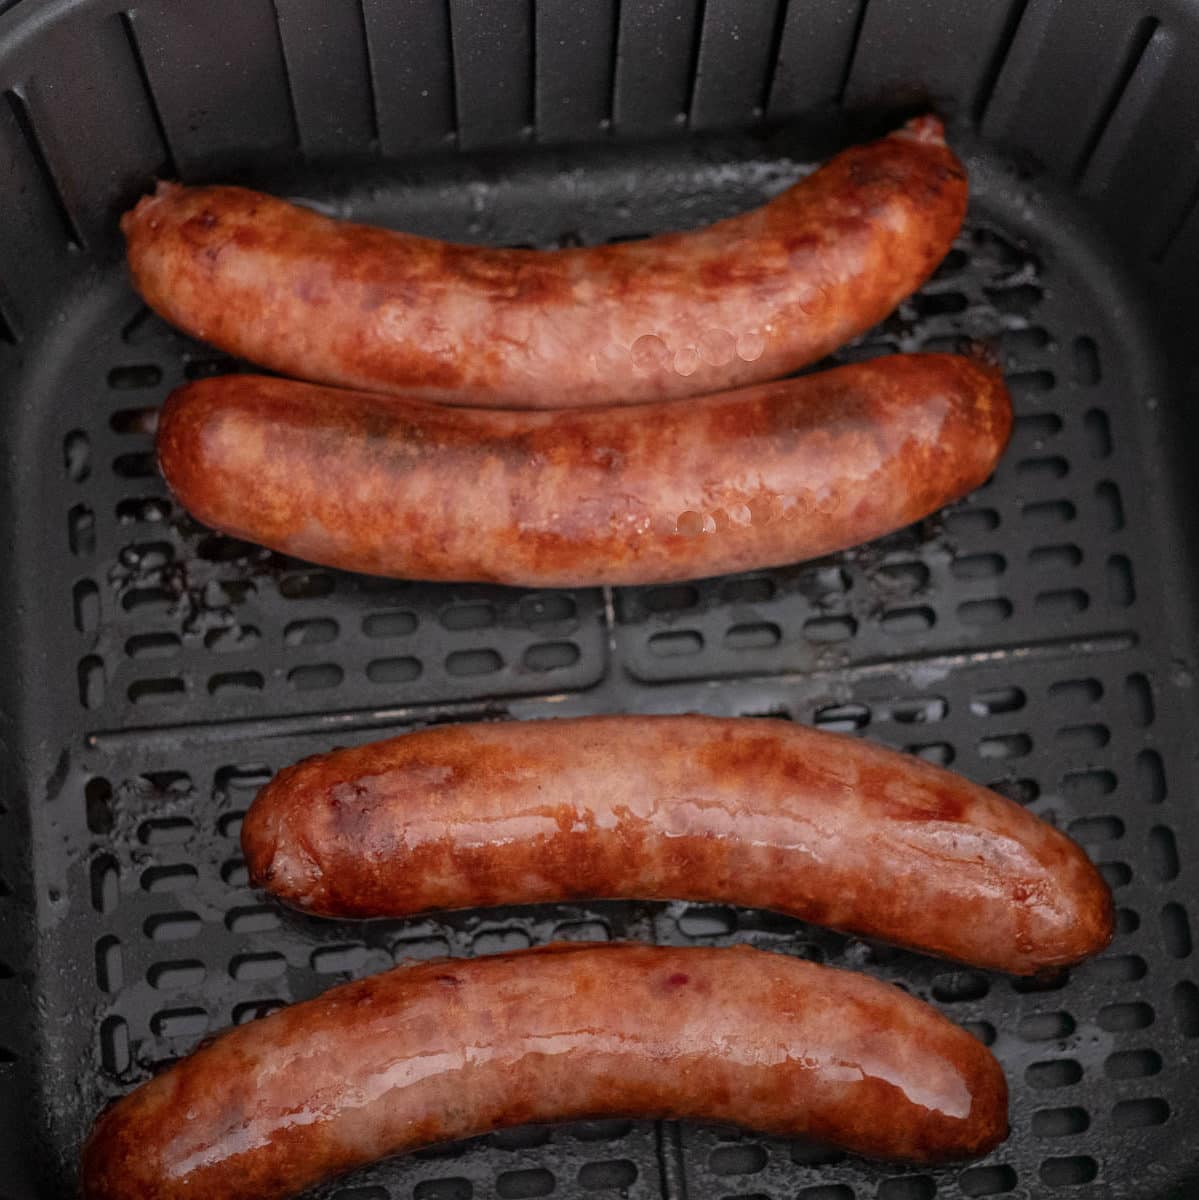 brats after air frying